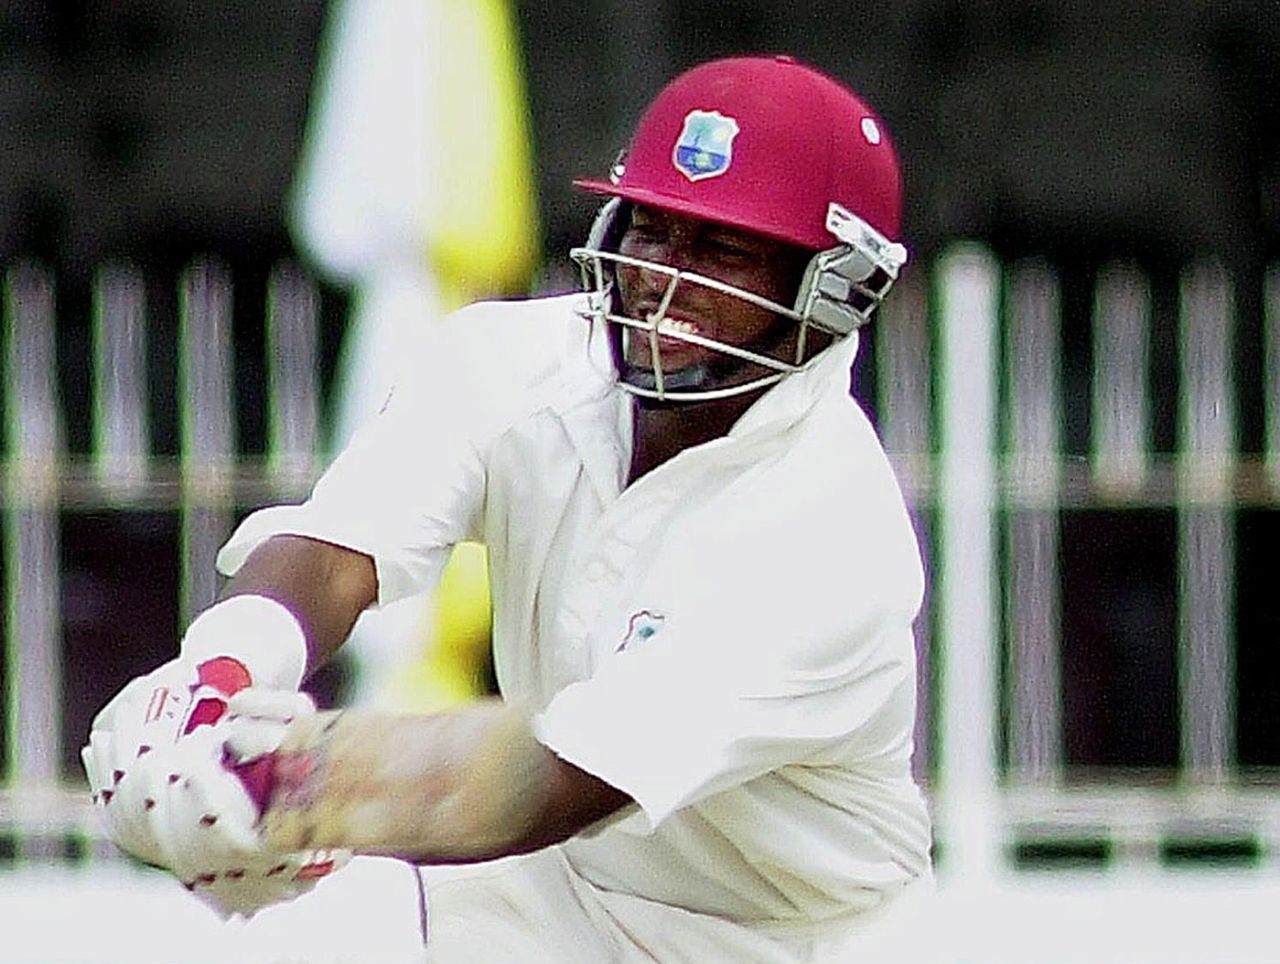 Brian Lara scored a century in the second innings, Sri Lanka v West Indies, 3rd Test, Colombo, 5th day, December 3, 2001